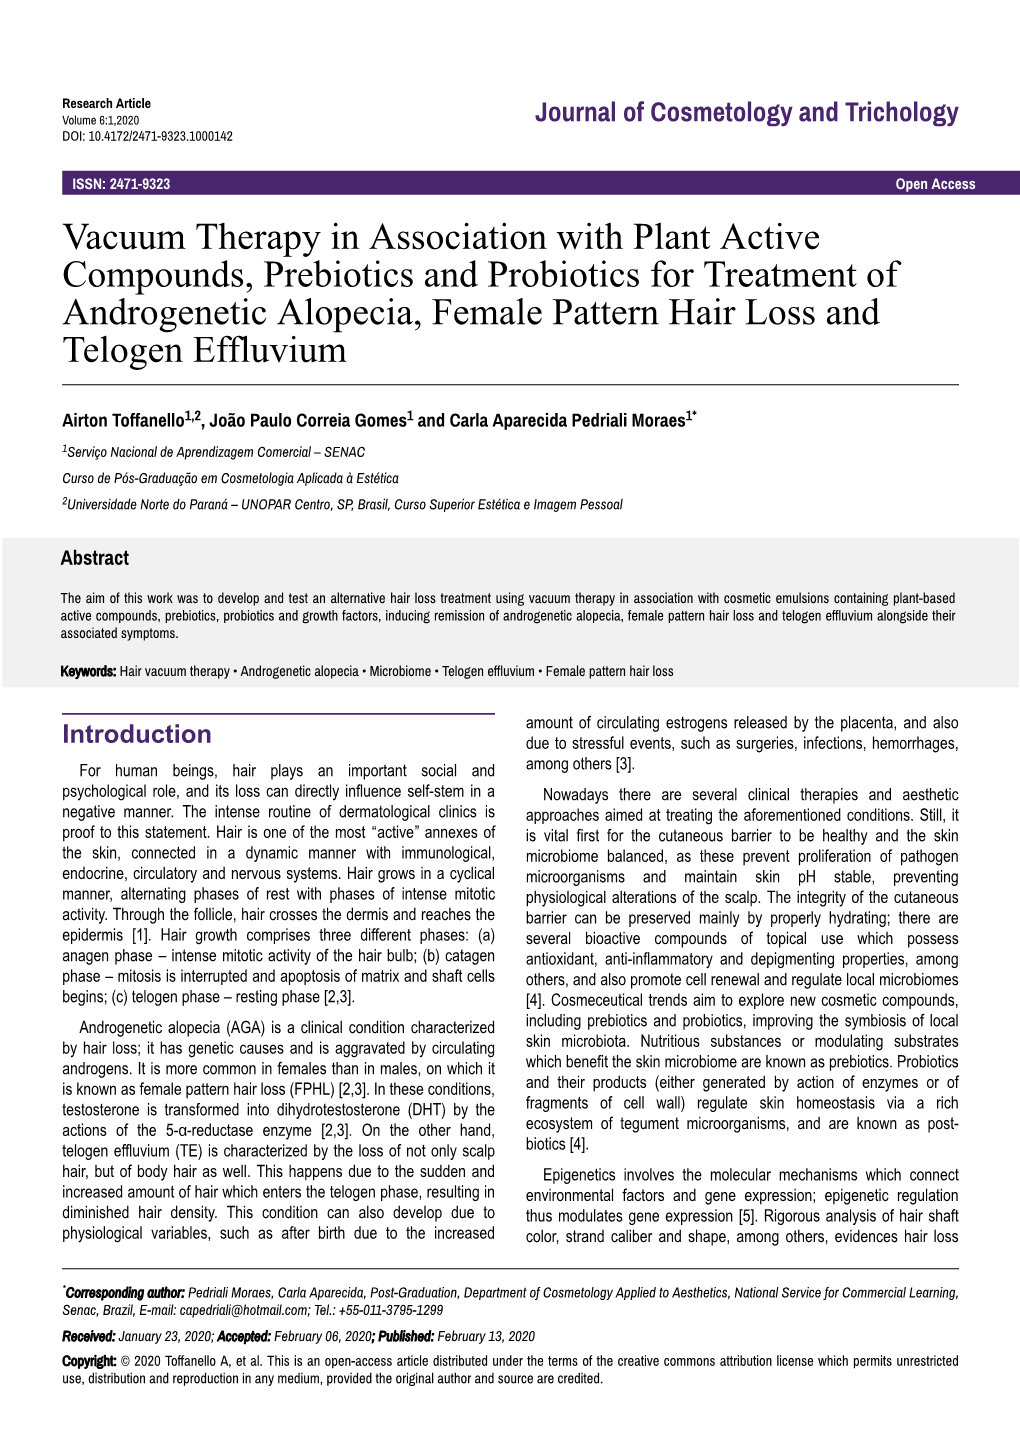 Vacuum Therapy in Association with Plant Active Compounds, Prebiotics and Probiotics for Treatment of Androgenetic Alopecia